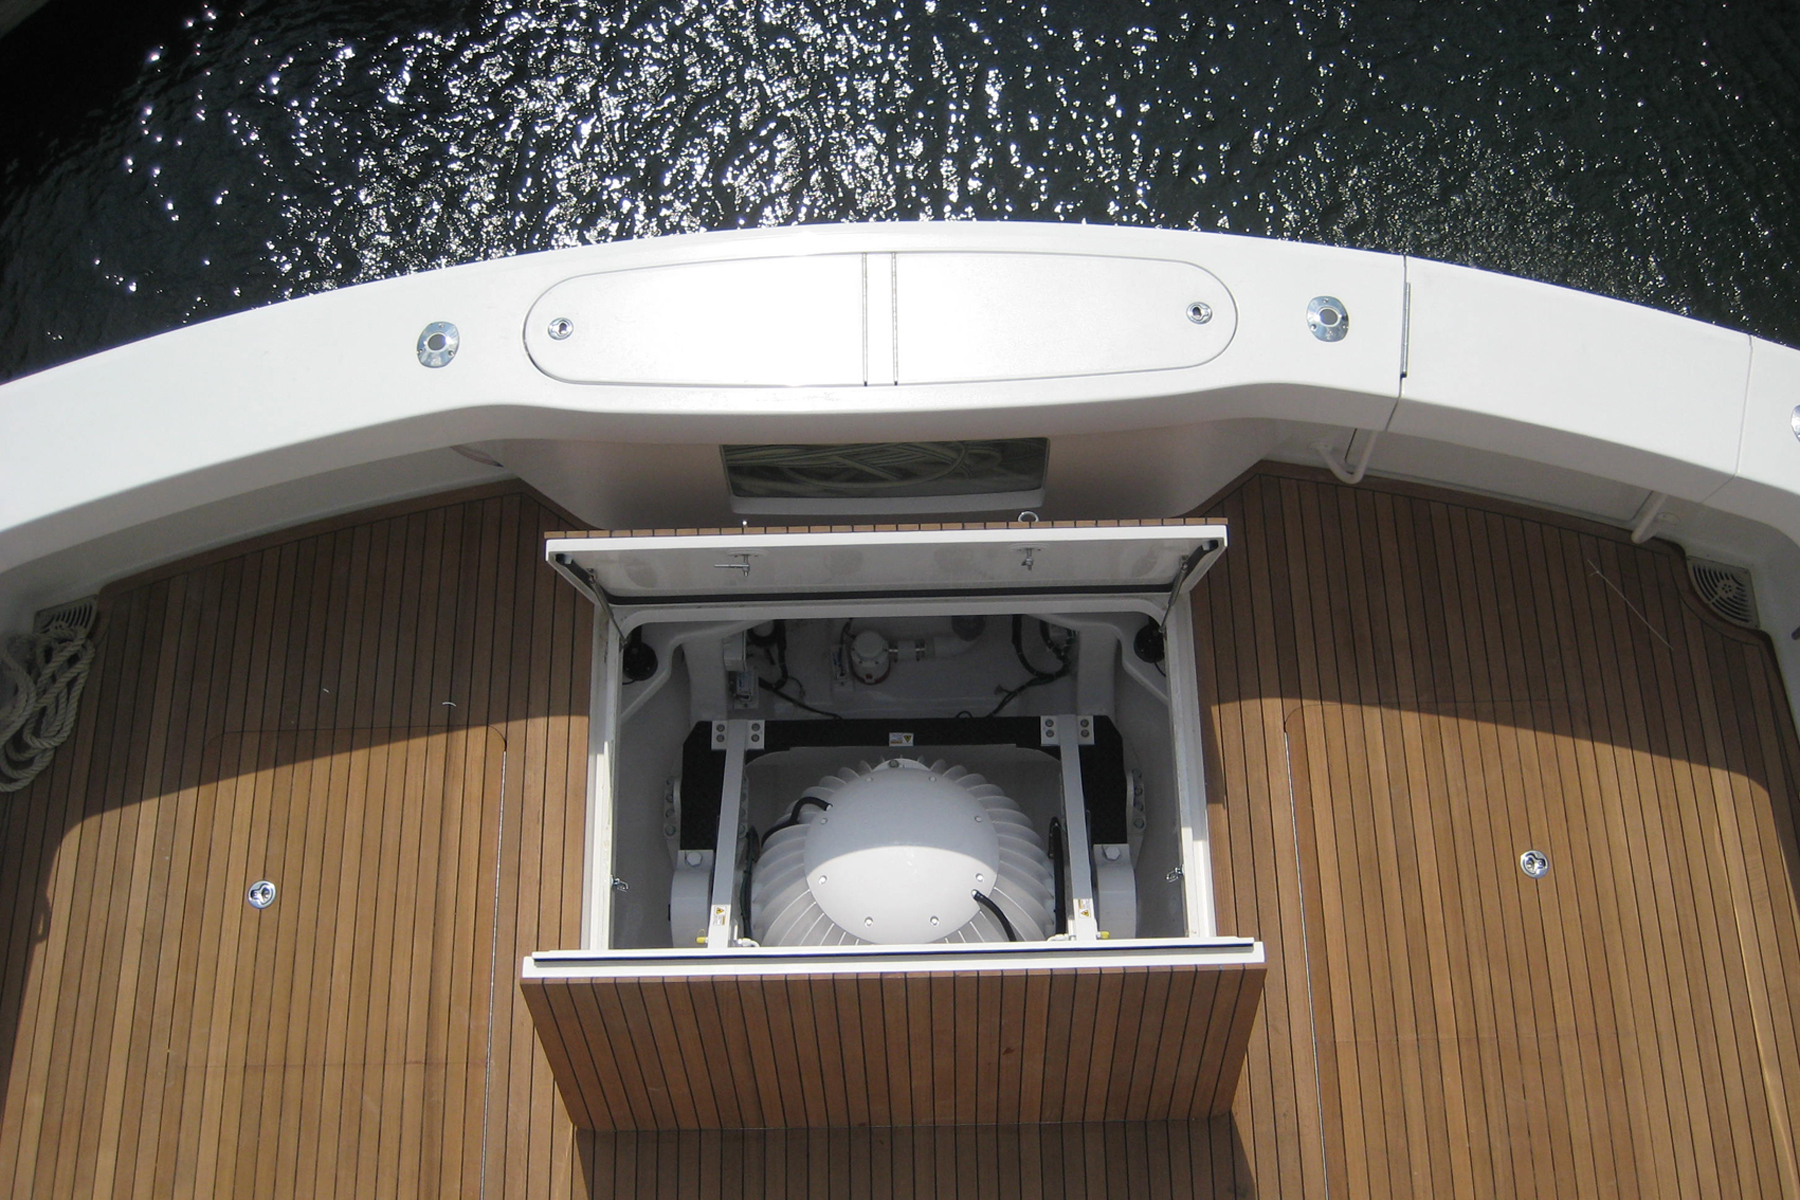 Sea trials demonstrate that the Seakeeper reduces boat roll of the Calypso Star II by 87% in two to four-foot seas.